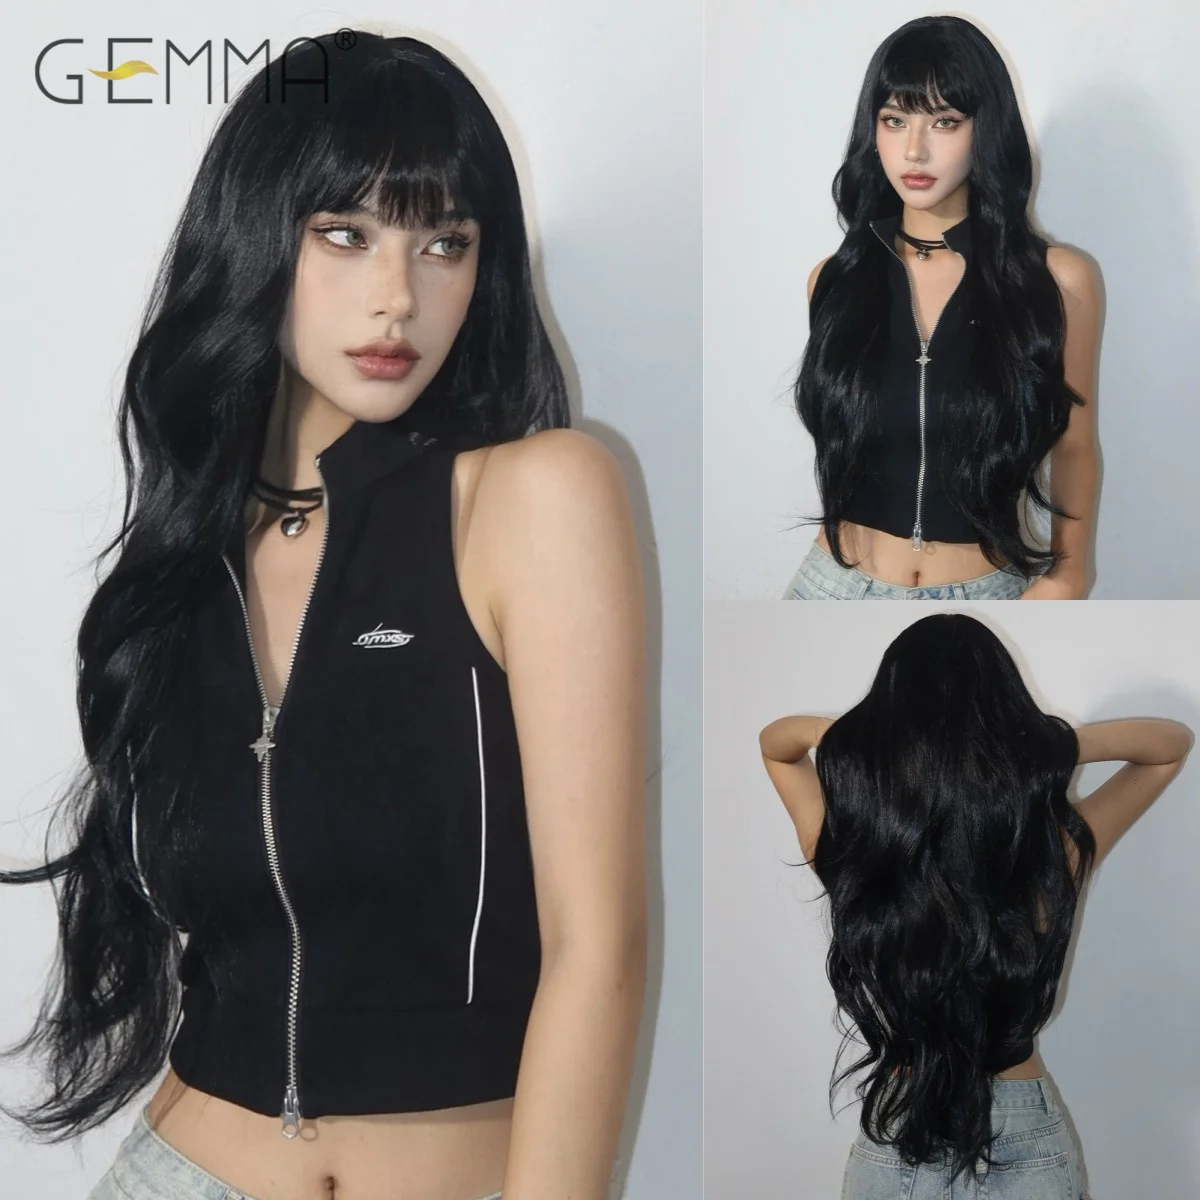 Black Synthetic Long Wavy Wig with Fluffy Bangs Natural Wave Wigs for Women Cosplay Daily Use Fake Hair Heat Resistant Fibre long wavy ombre blonde hair wigs middle part natural synthetic wigs for afro women daily cosplay fashion heat resistant wigs